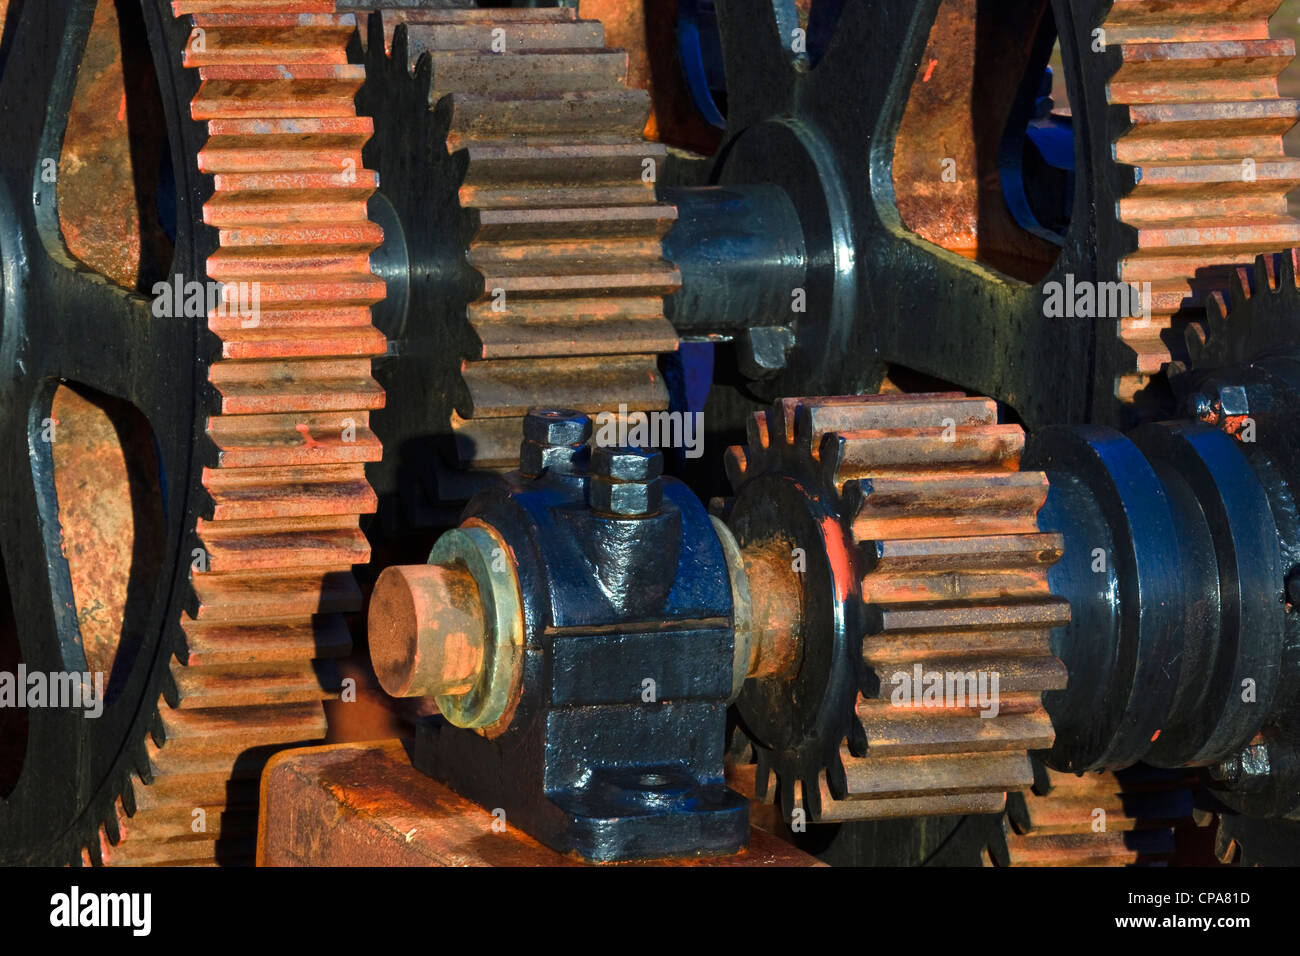 Red Car Engine stock image. Image of fuel, gears, mechanical